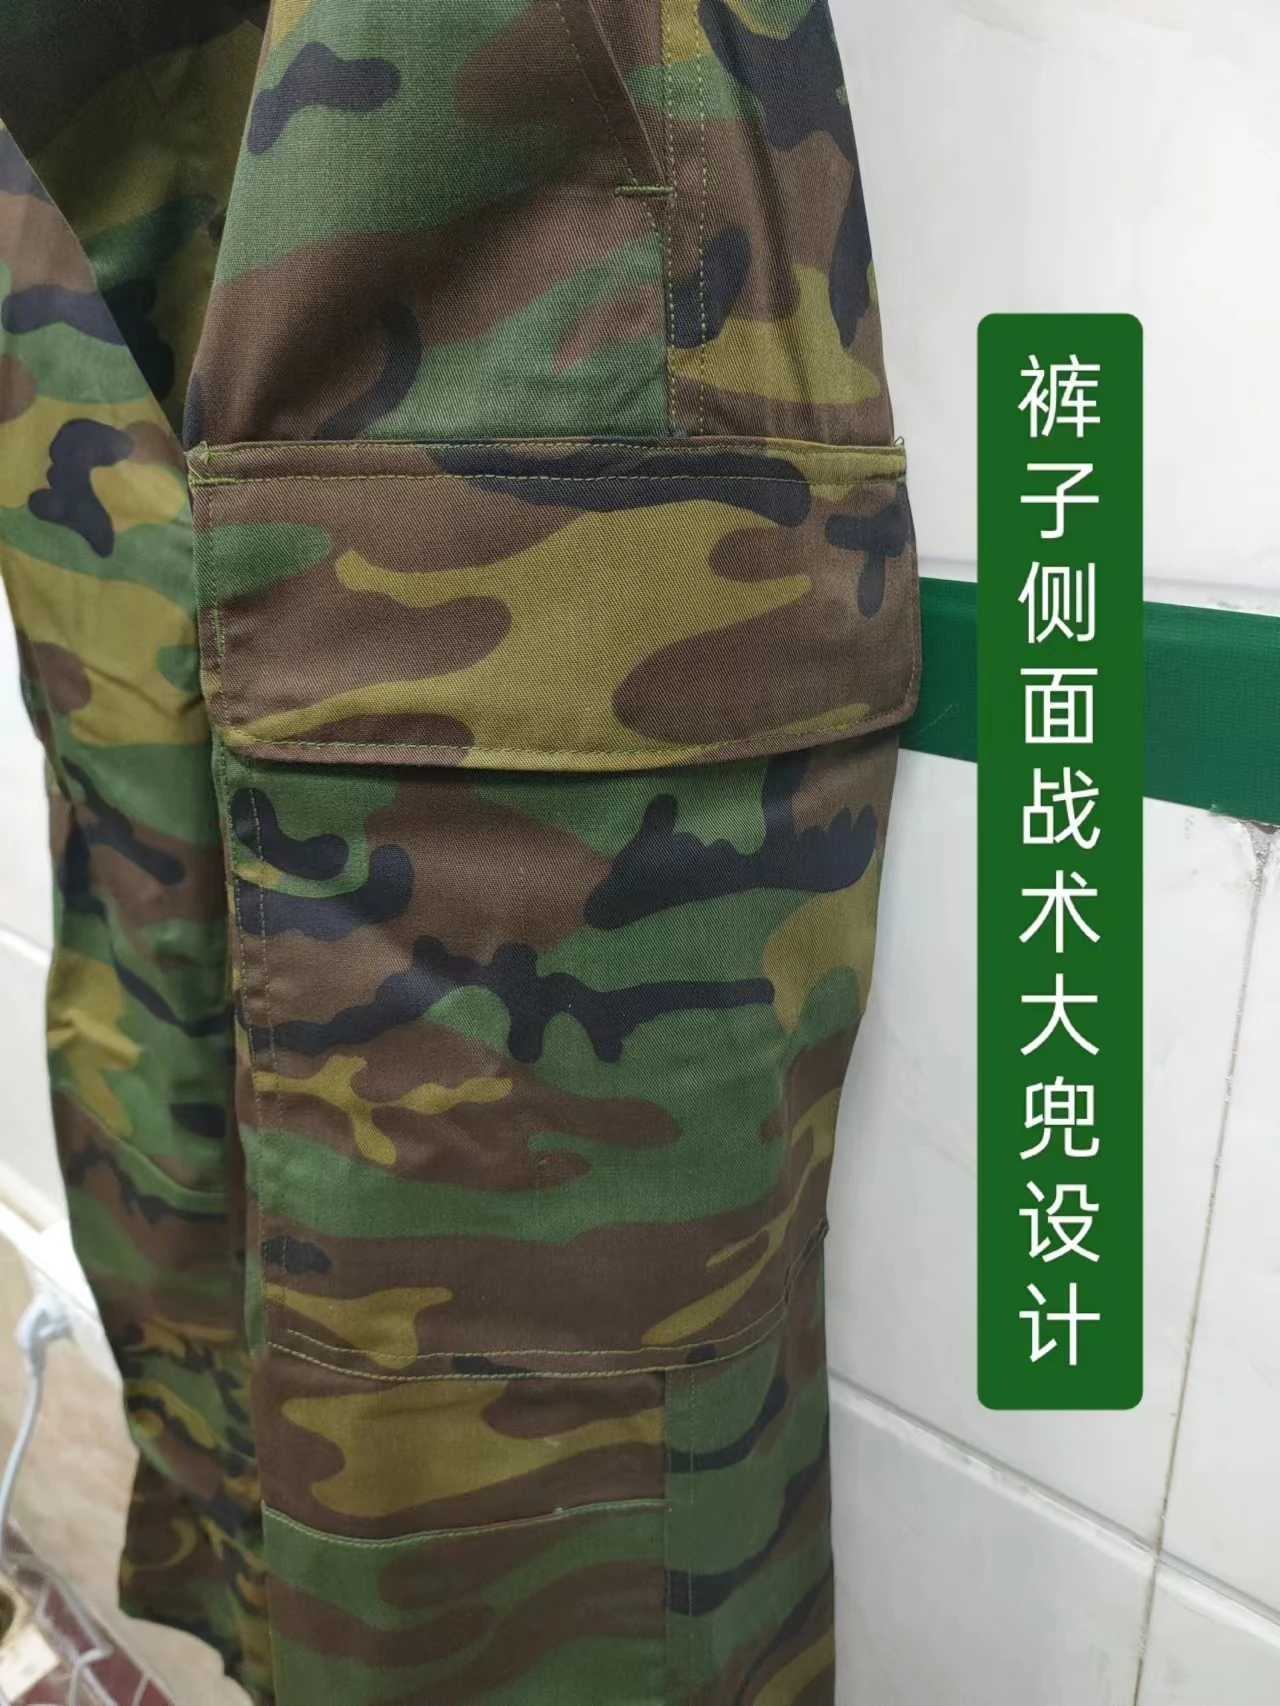 Camo Suit with Multiple Pockets for Outdoor Mountaineering Tactics, Sturdy and Durable Fashion Workwear Pants and Top